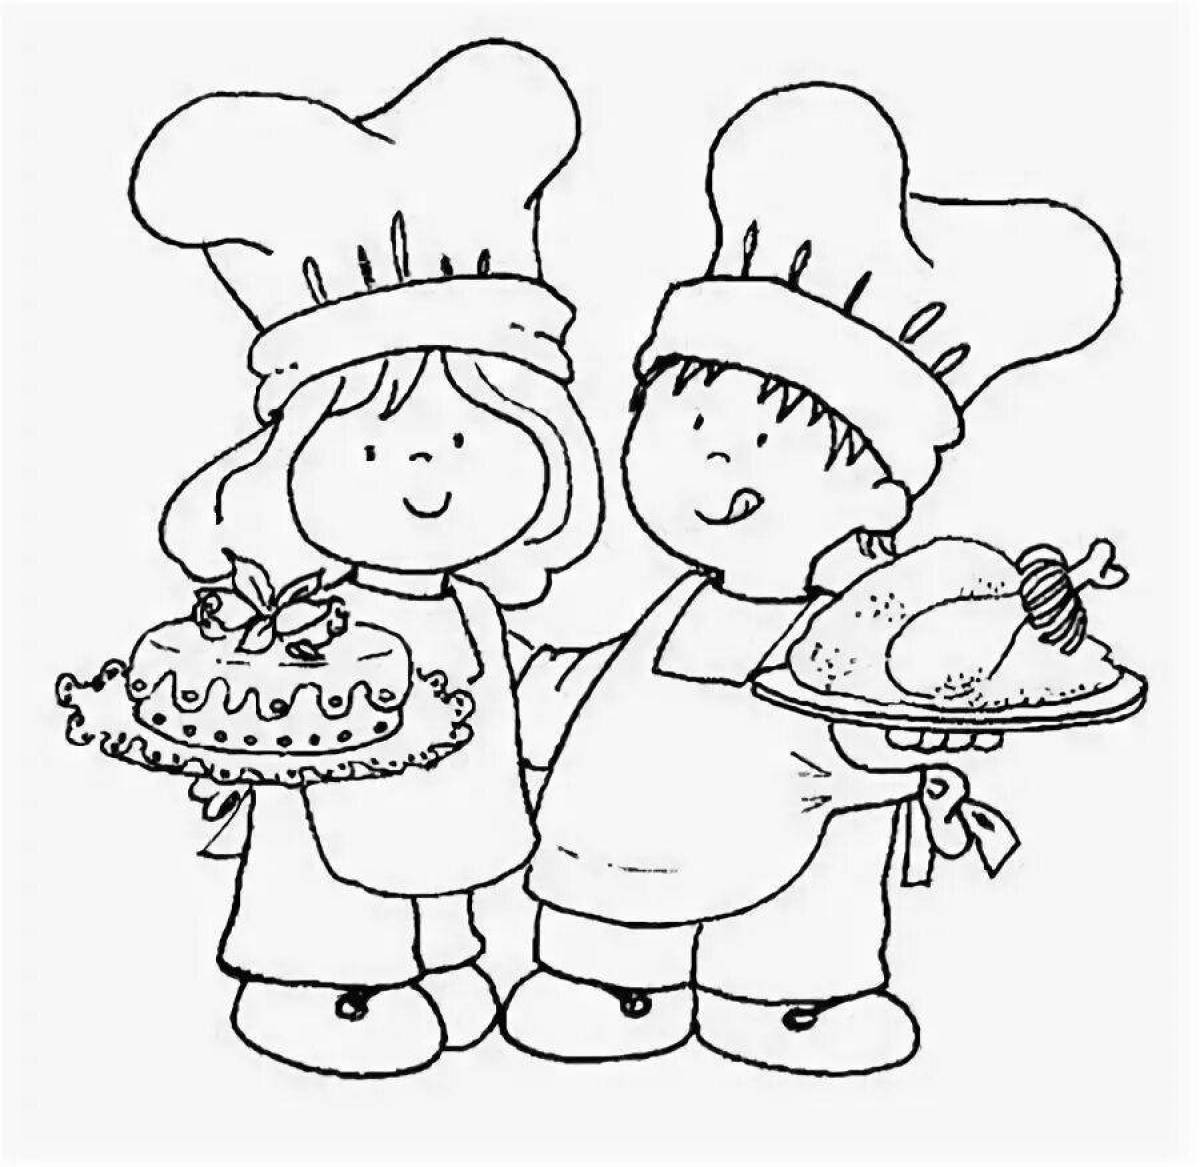 Exciting pastry chef coloring book for kids